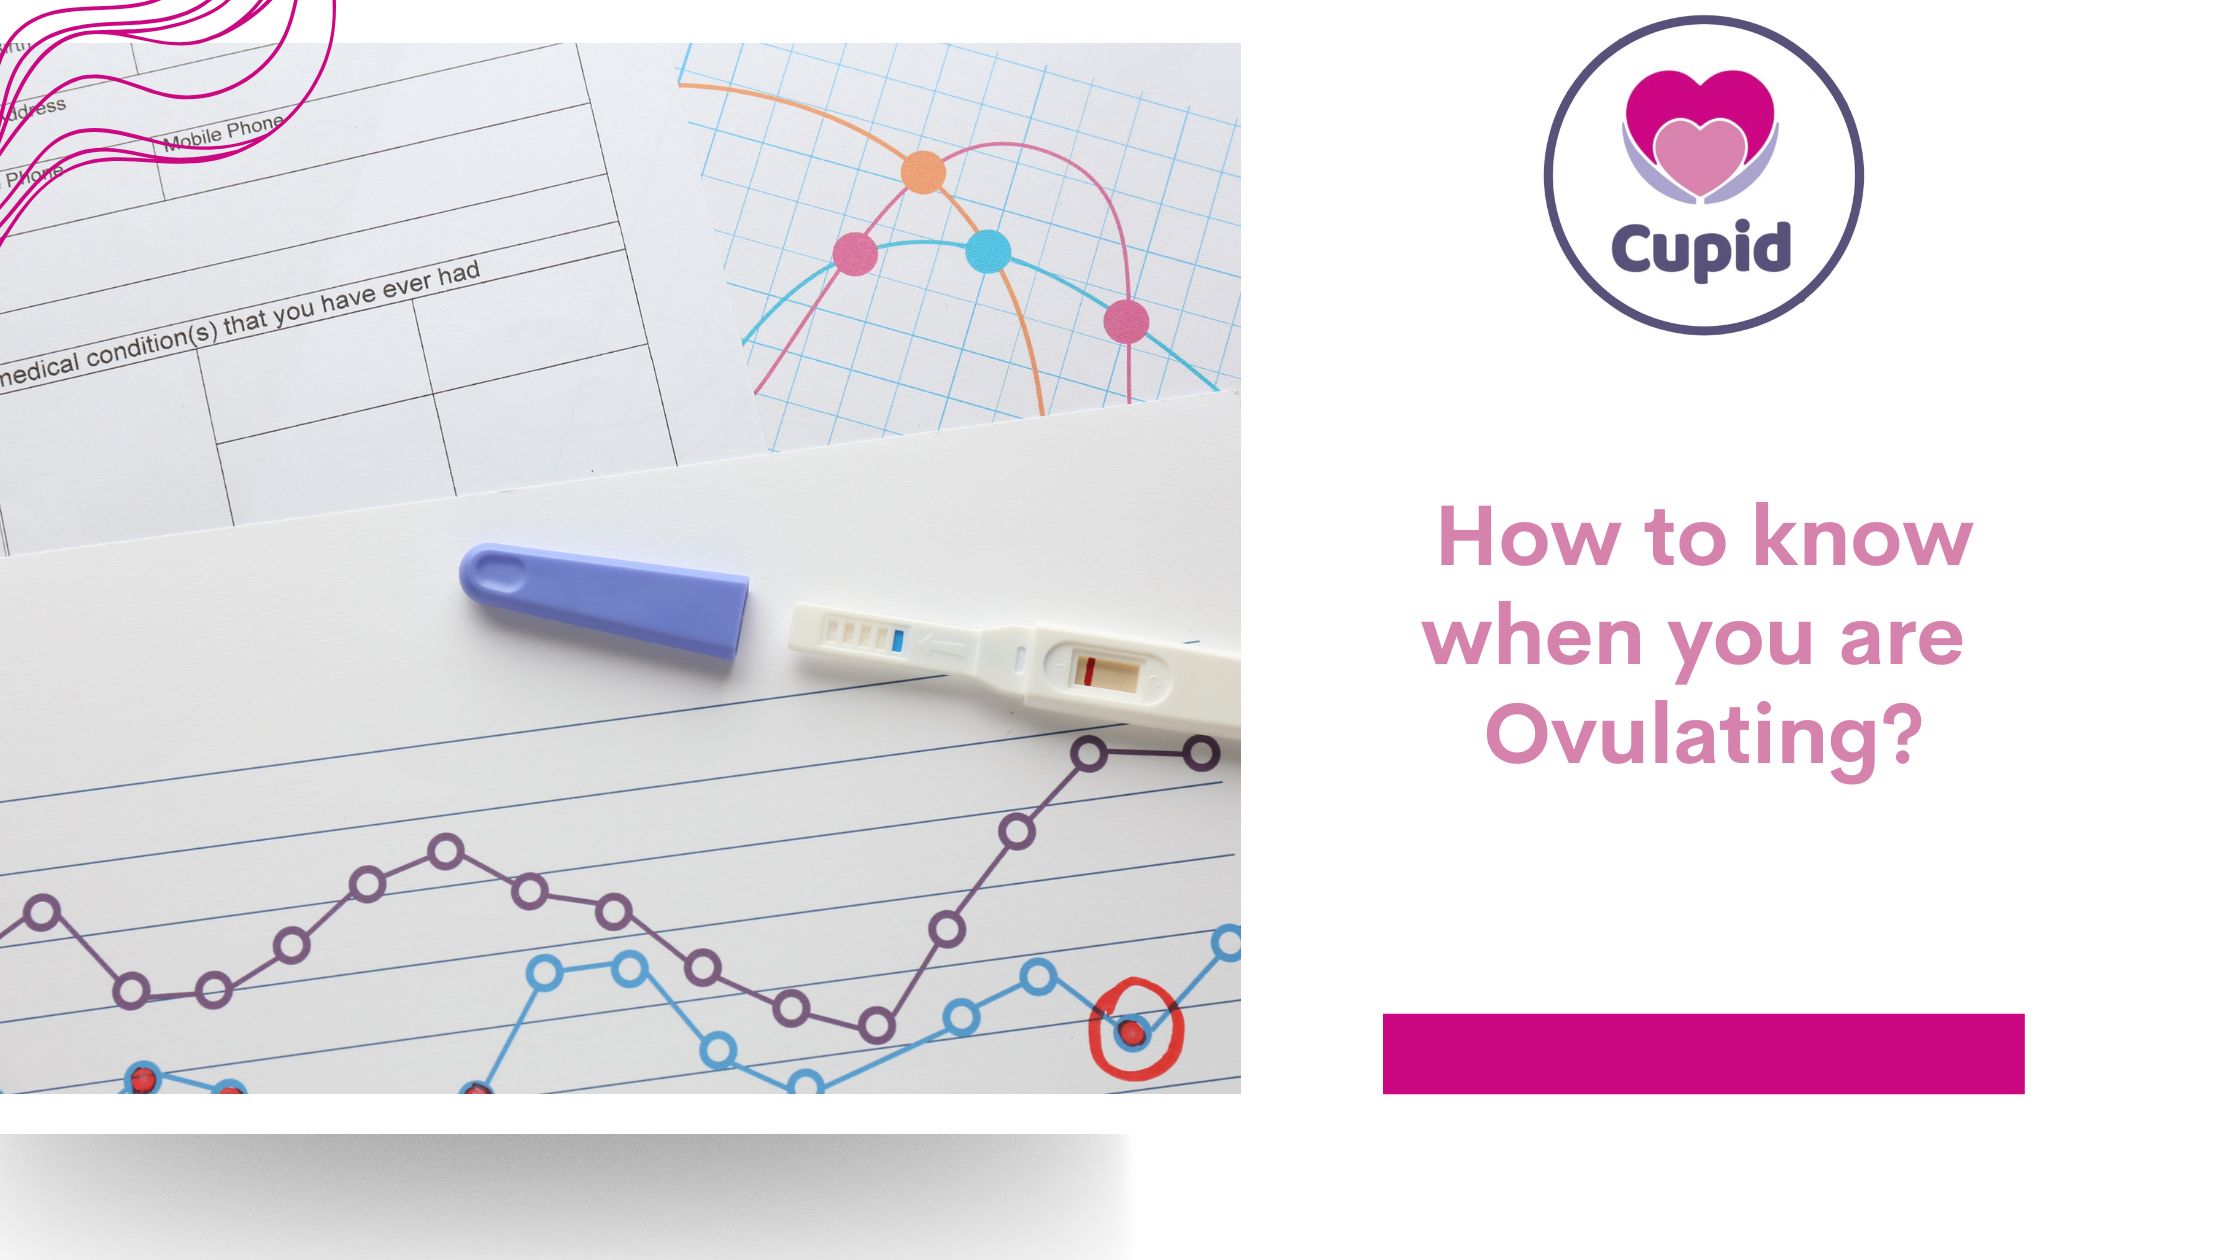 How can you know if your ovulating?